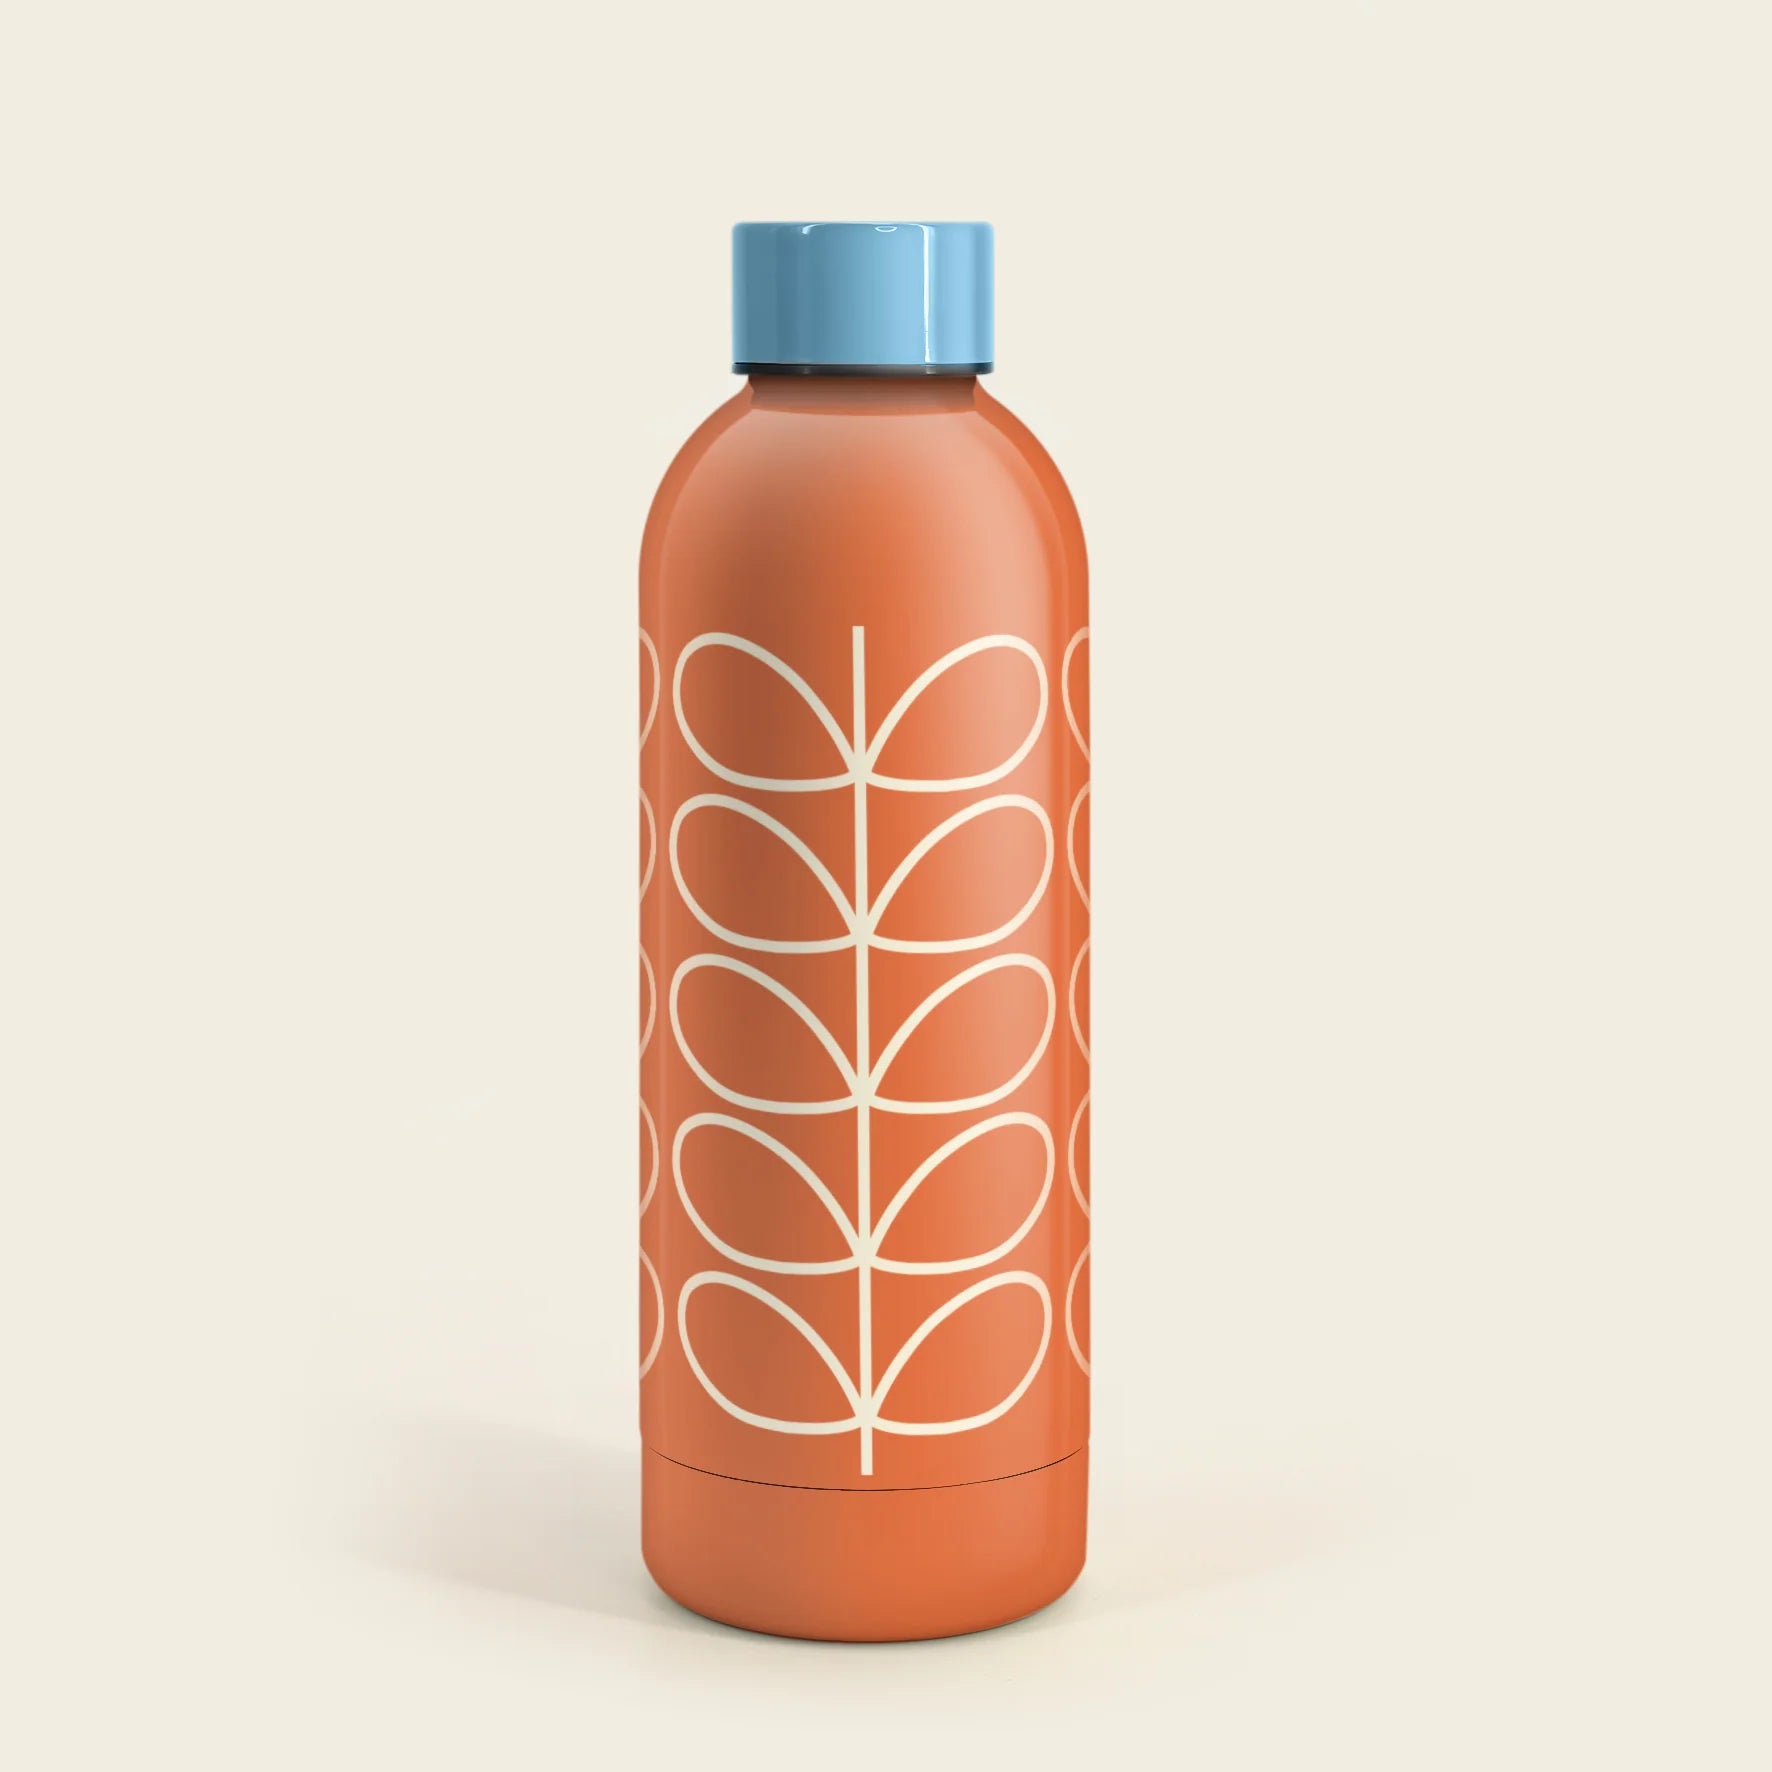 Fab Gifts | Orla Kiely Linear Stem Stainless Steel Water Bottle by Weirs of Baggot Street